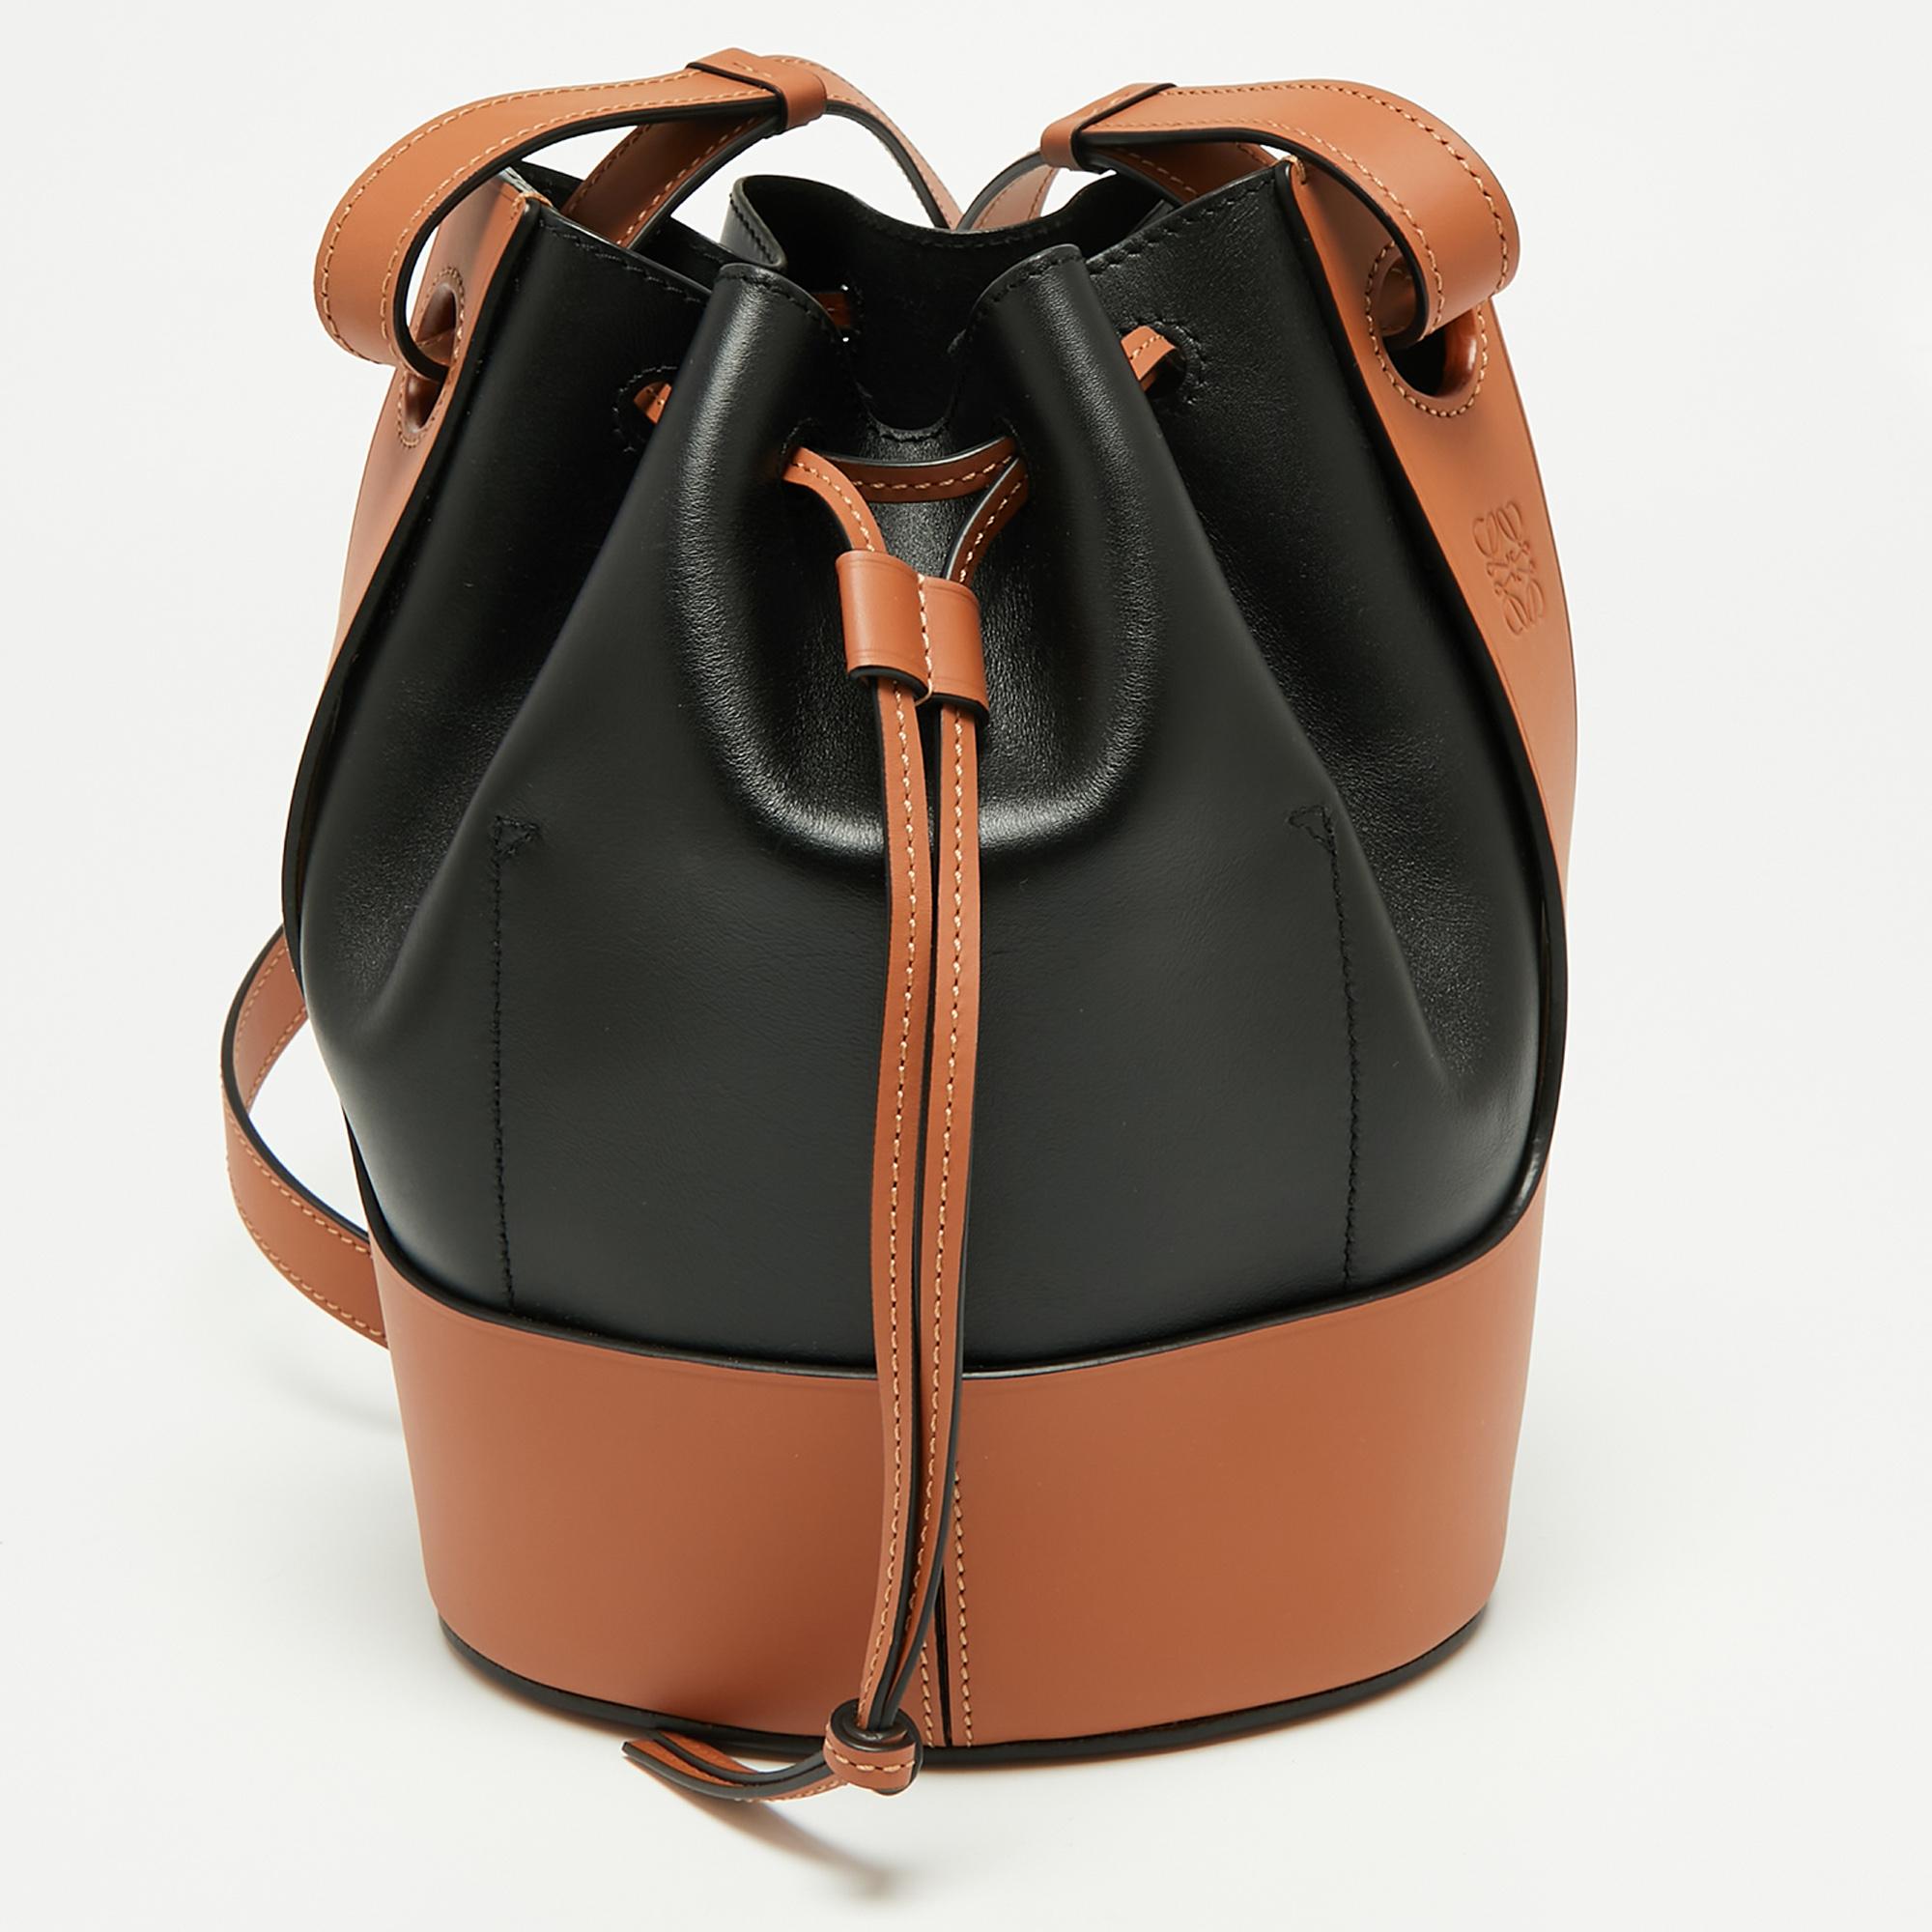 This new-age, functional Balloon bucket bag presents itself in black and tan leather, secured by a leather drawstring. It comes detailed with a long shoulder strap that can be adjusted to the desired drop. Carry your everyday essentials in the